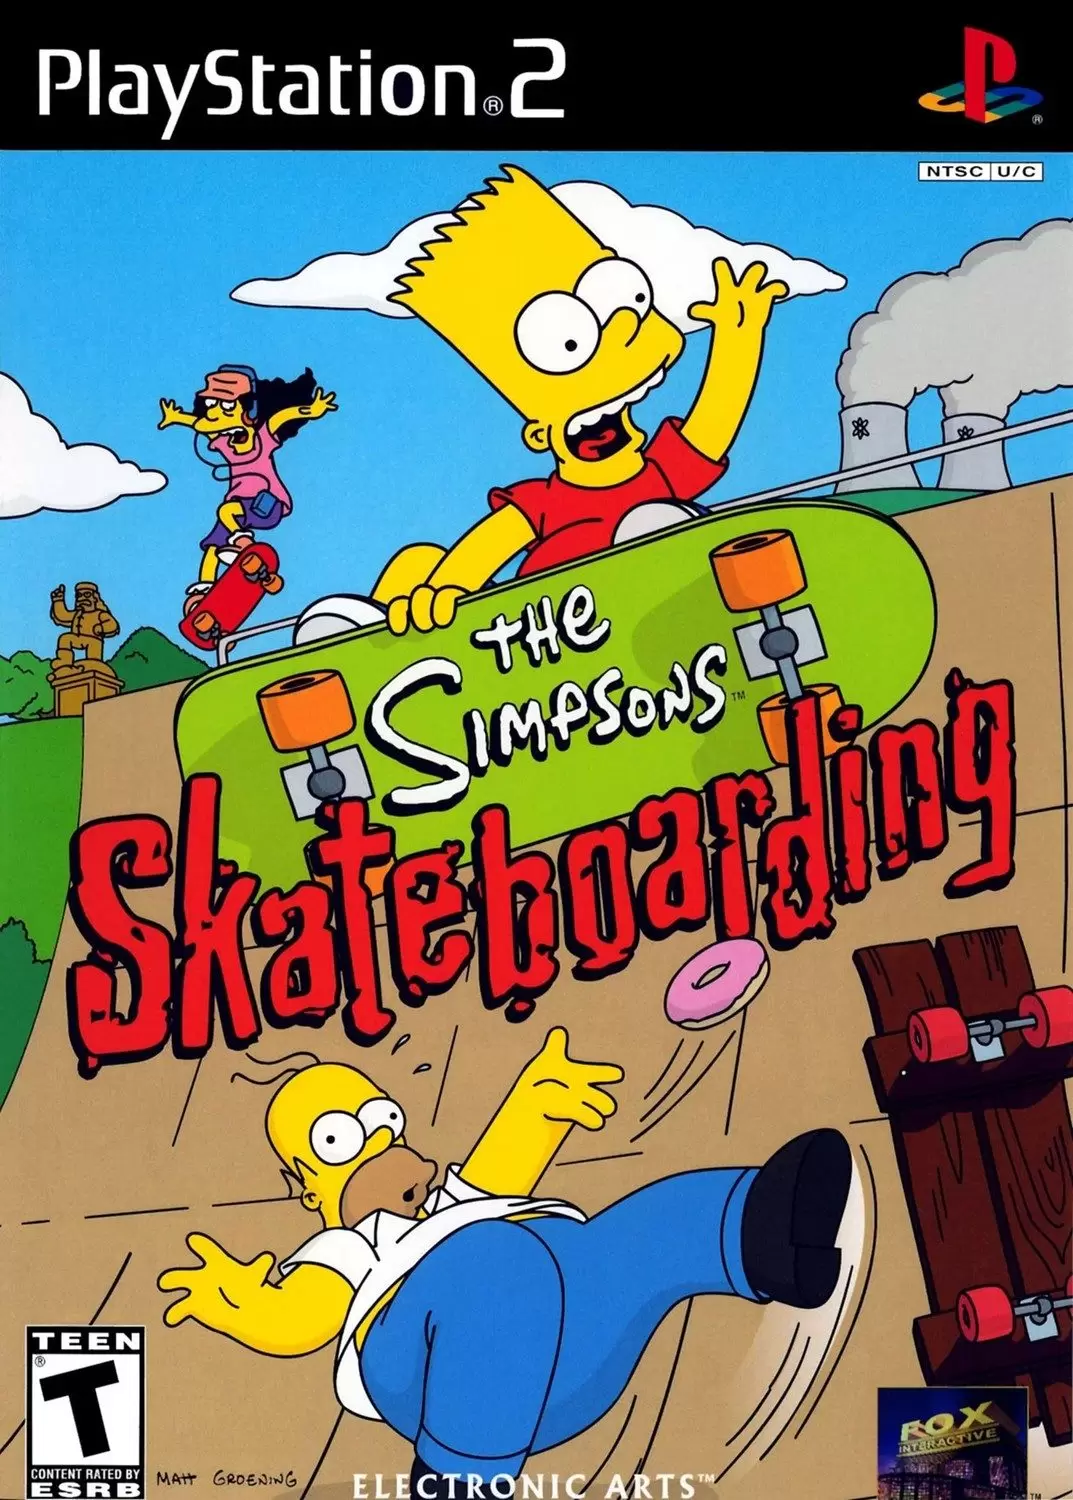 PS2 Games - The Simpsons Skateboarding